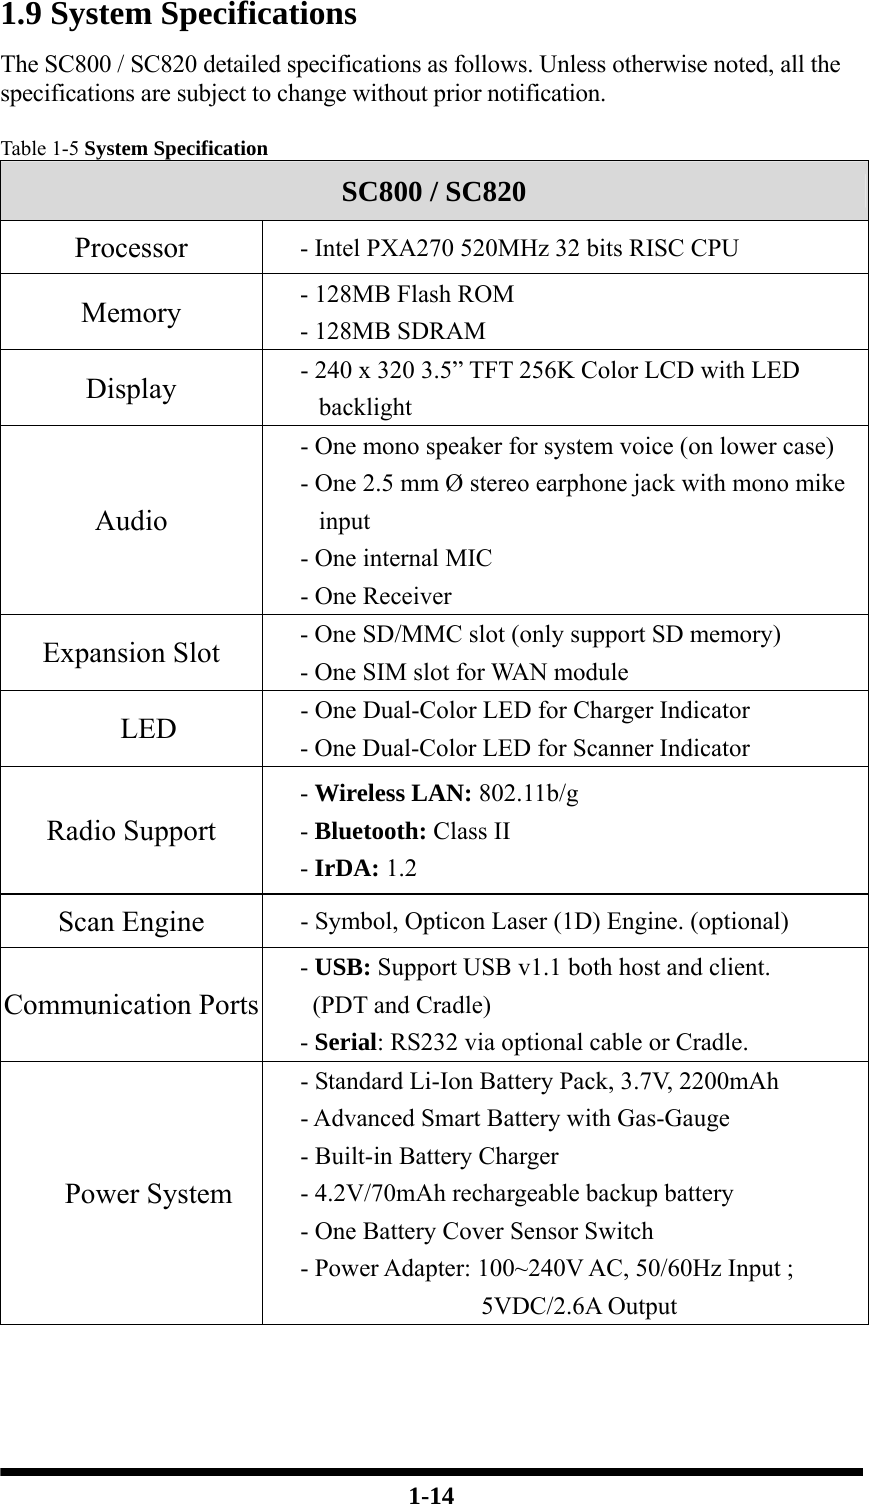  1-14 1.9 System Specifications The SC800 / SC820 detailed specifications as follows. Unless otherwise noted, all the specifications are subject to change without prior notification.  Table 1-5 System Specification SC800 / SC820 Processor  - Intel PXA270 520MHz 32 bits RISC CPU Memory  - 128MB Flash ROM - 128MB SDRAM Display  - 240 x 320 3.5” TFT 256K Color LCD with LED backlight Audio - One mono speaker for system voice (on lower case) - One 2.5 mm Ø stereo earphone jack with mono mike input - One internal MIC - One Receiver Expansion Slot  - One SD/MMC slot (only support SD memory) - One SIM slot for WAN module LED  - One Dual-Color LED for Charger Indicator - One Dual-Color LED for Scanner Indicator Radio Support - Wireless LAN: 802.11b/g - Bluetooth: Class II - IrDA: 1.2 Scan Engine  - Symbol, Opticon Laser (1D) Engine. (optional) Communication Ports - USB: Support USB v1.1 both host and client. (PDT and Cradle)   - Serial: RS232 via optional cable or Cradle. Power System - Standard Li-Ion Battery Pack, 3.7V, 2200mAh - Advanced Smart Battery with Gas-Gauge - Built-in Battery Charger - 4.2V/70mAh rechargeable backup battery - One Battery Cover Sensor Switch - Power Adapter: 100~240V AC, 50/60Hz Input ; 5VDC/2.6A Output 